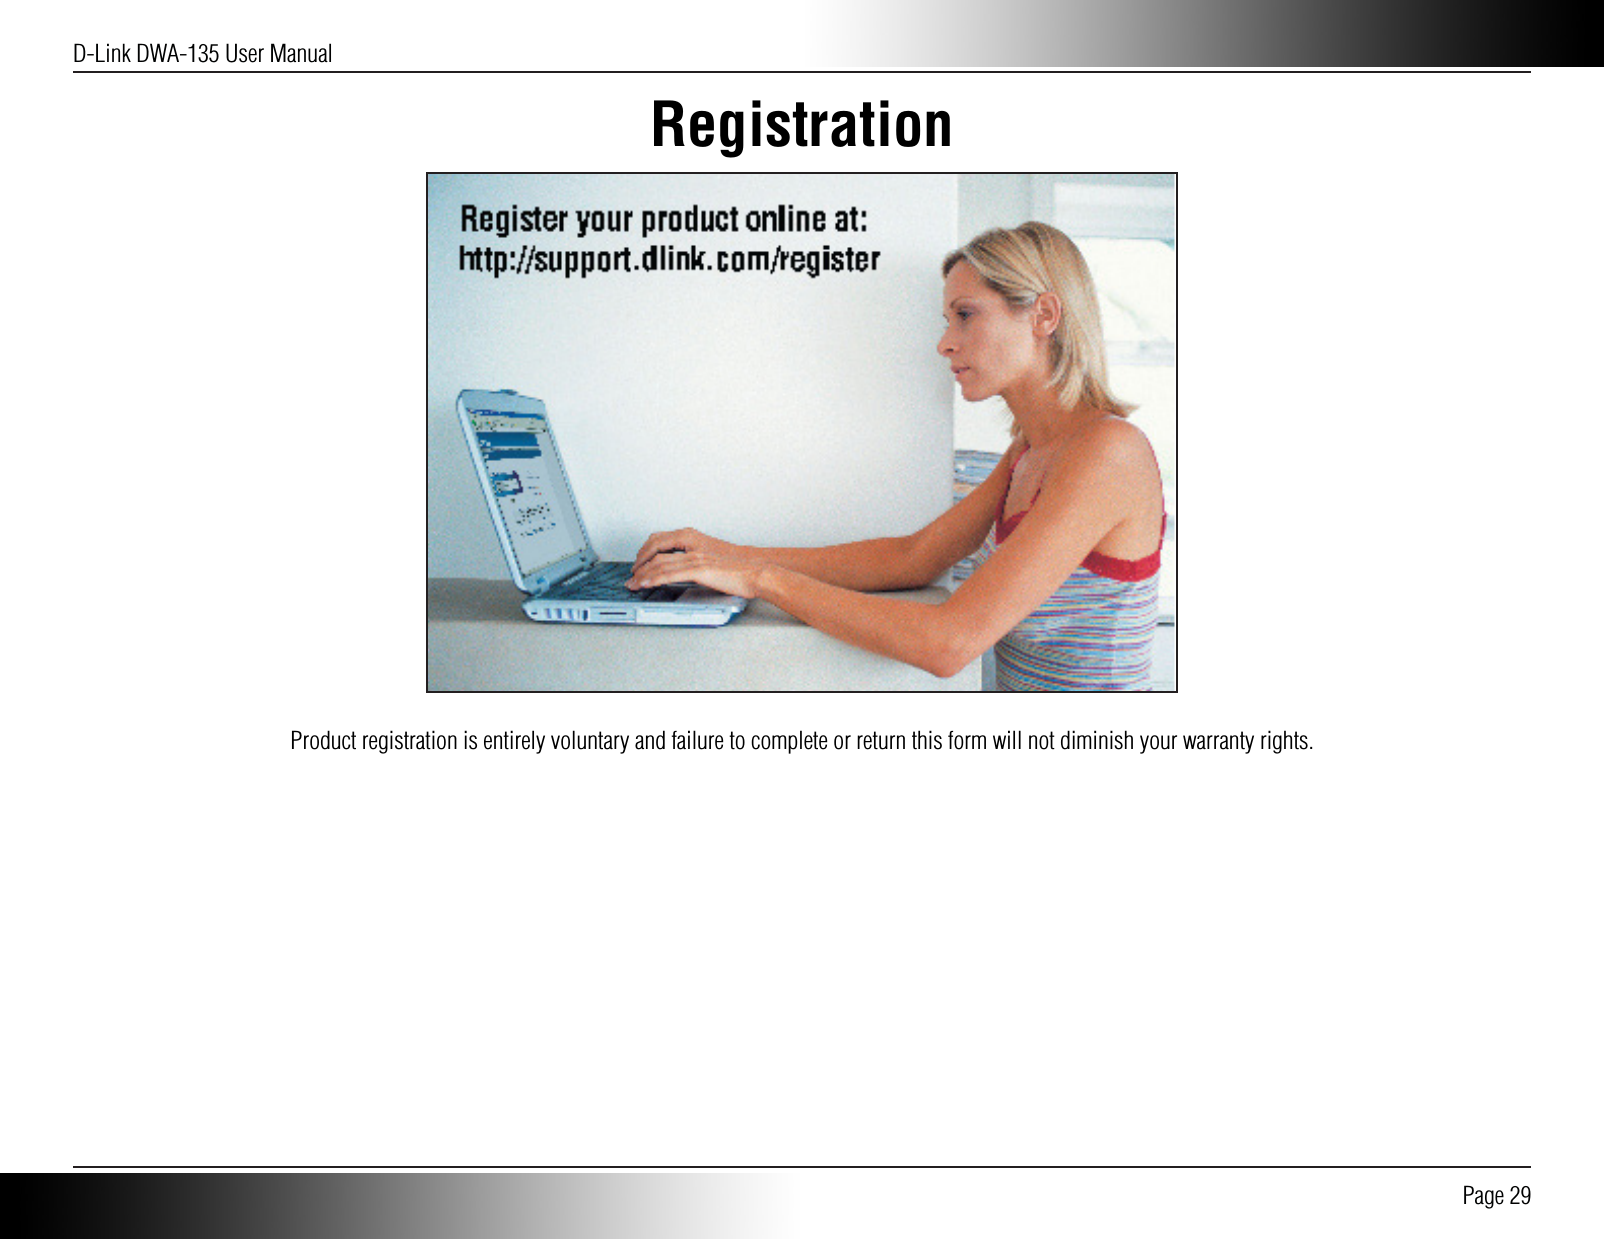 D-Link DWA-135 User Manual Page 29RegistrationProduct registration is entirely voluntary and failure to complete or return this form will not diminish your warranty rights.